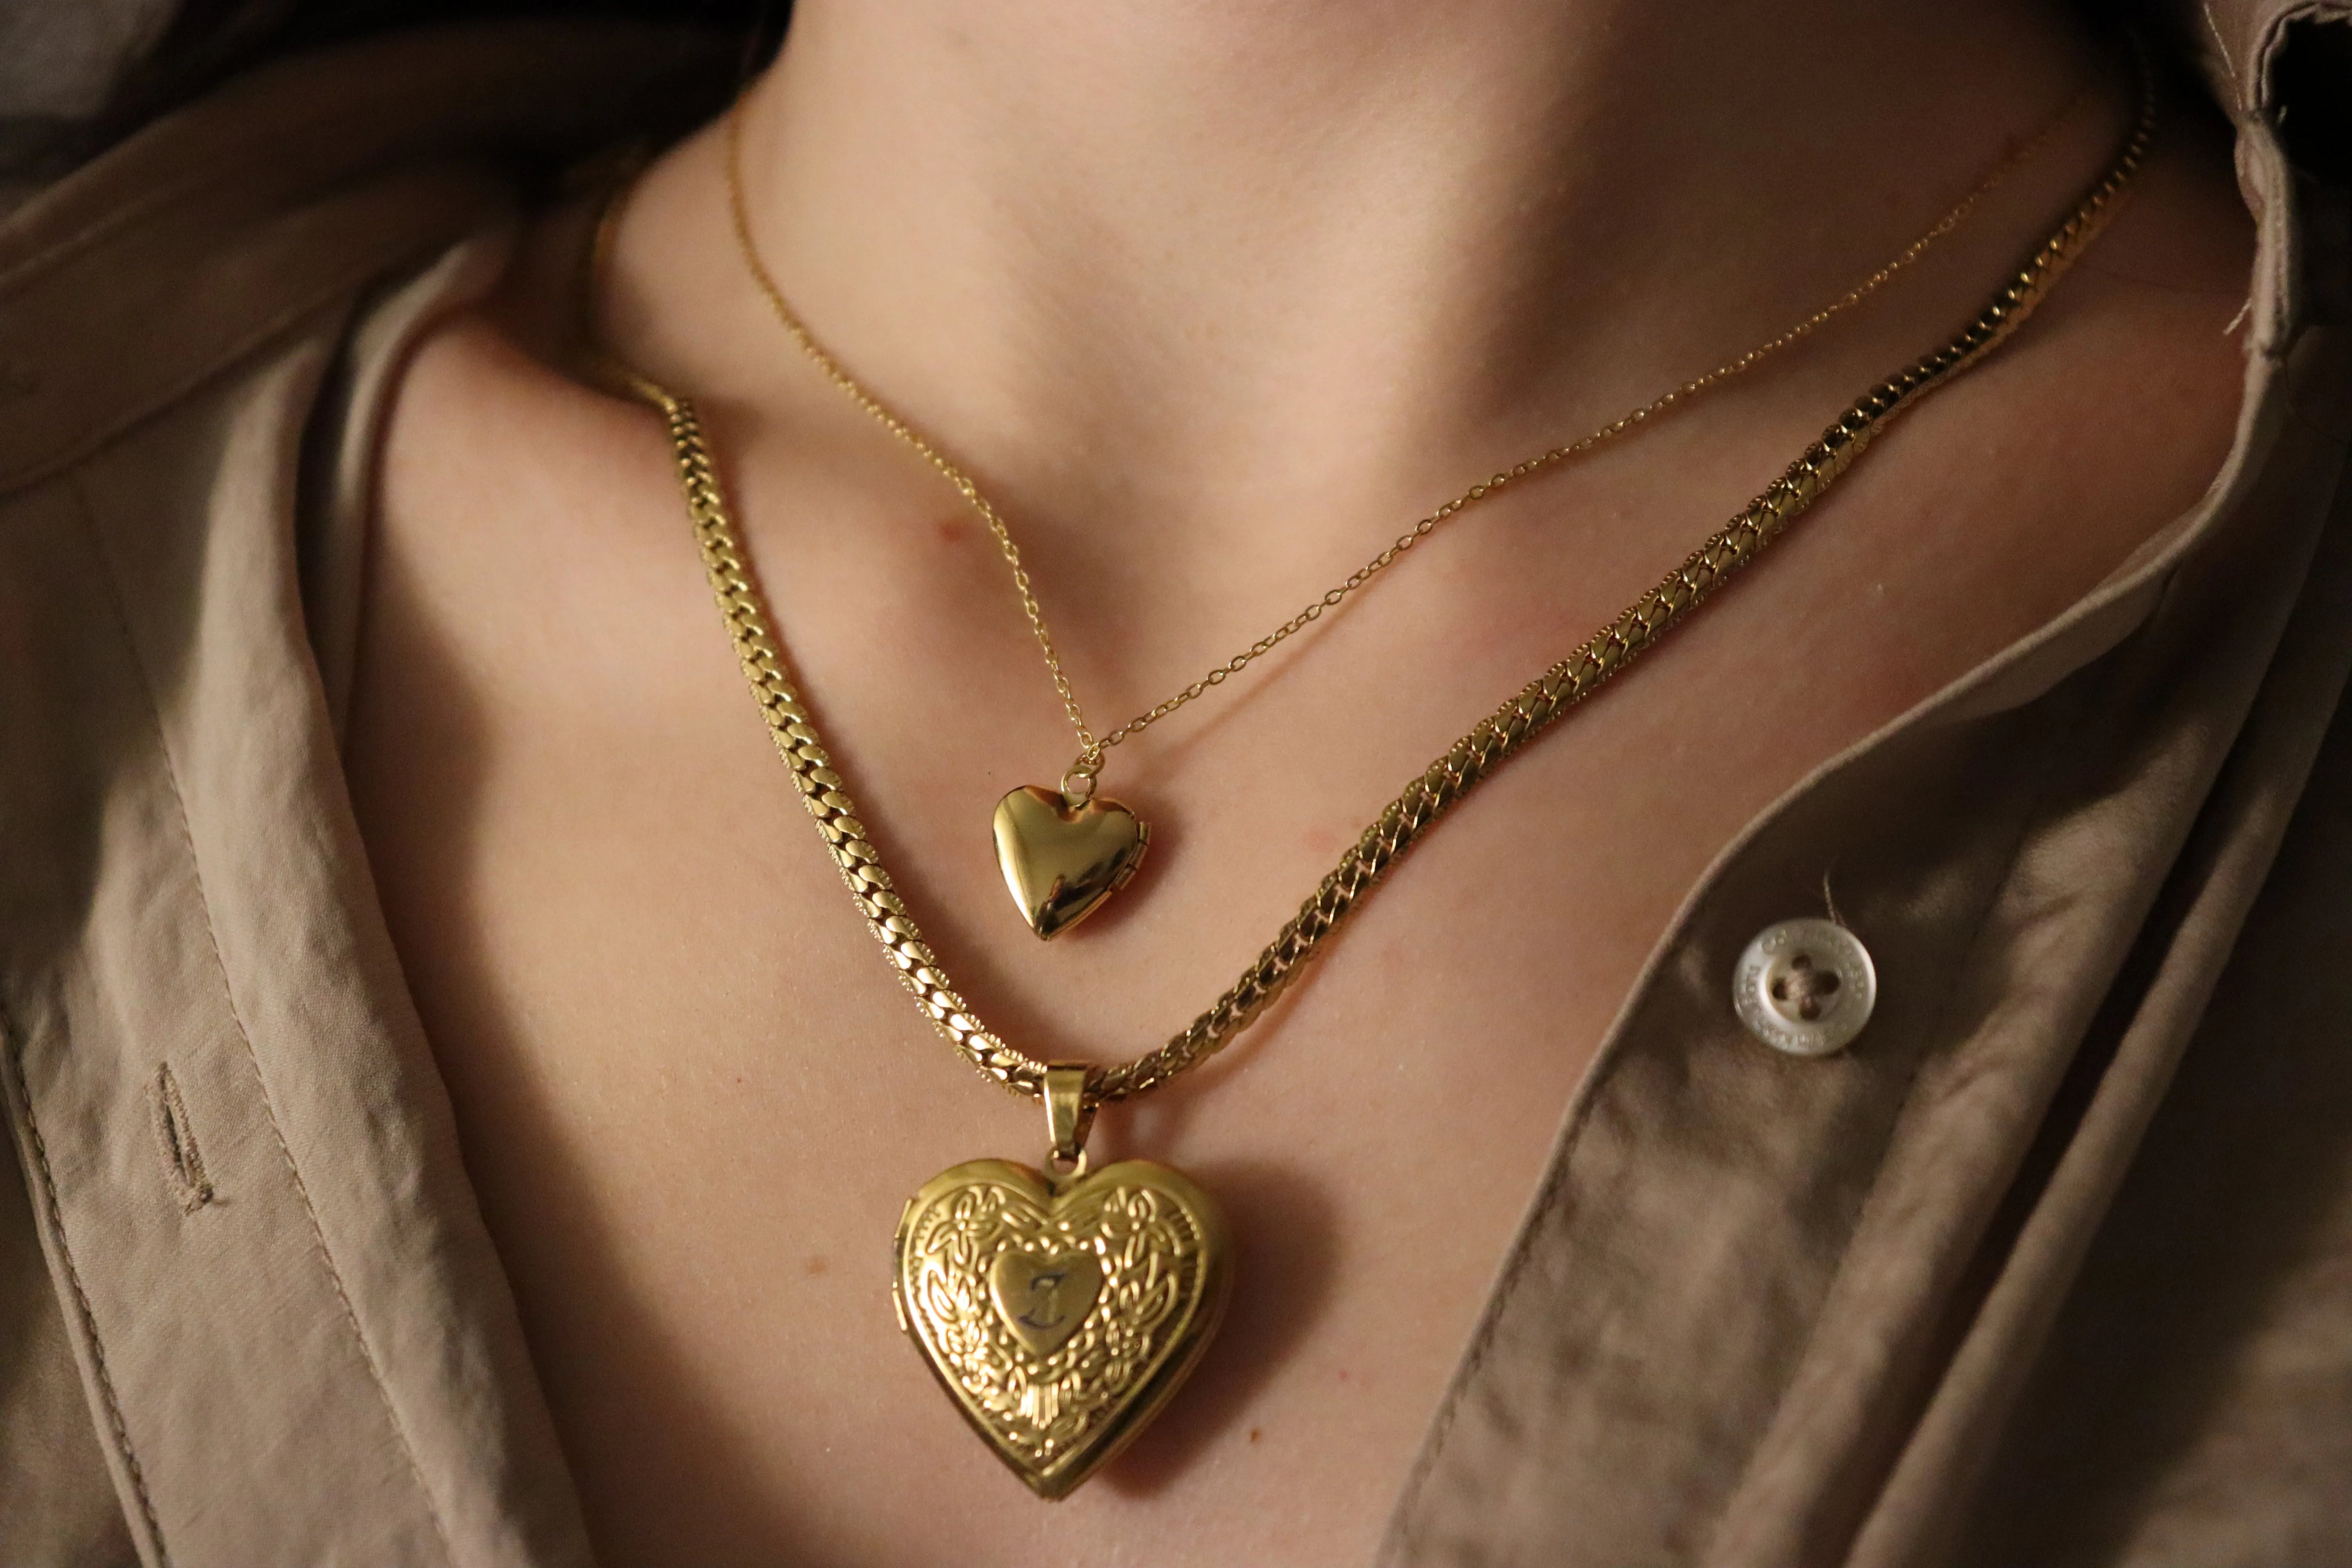 Love Locket Necklace product images.